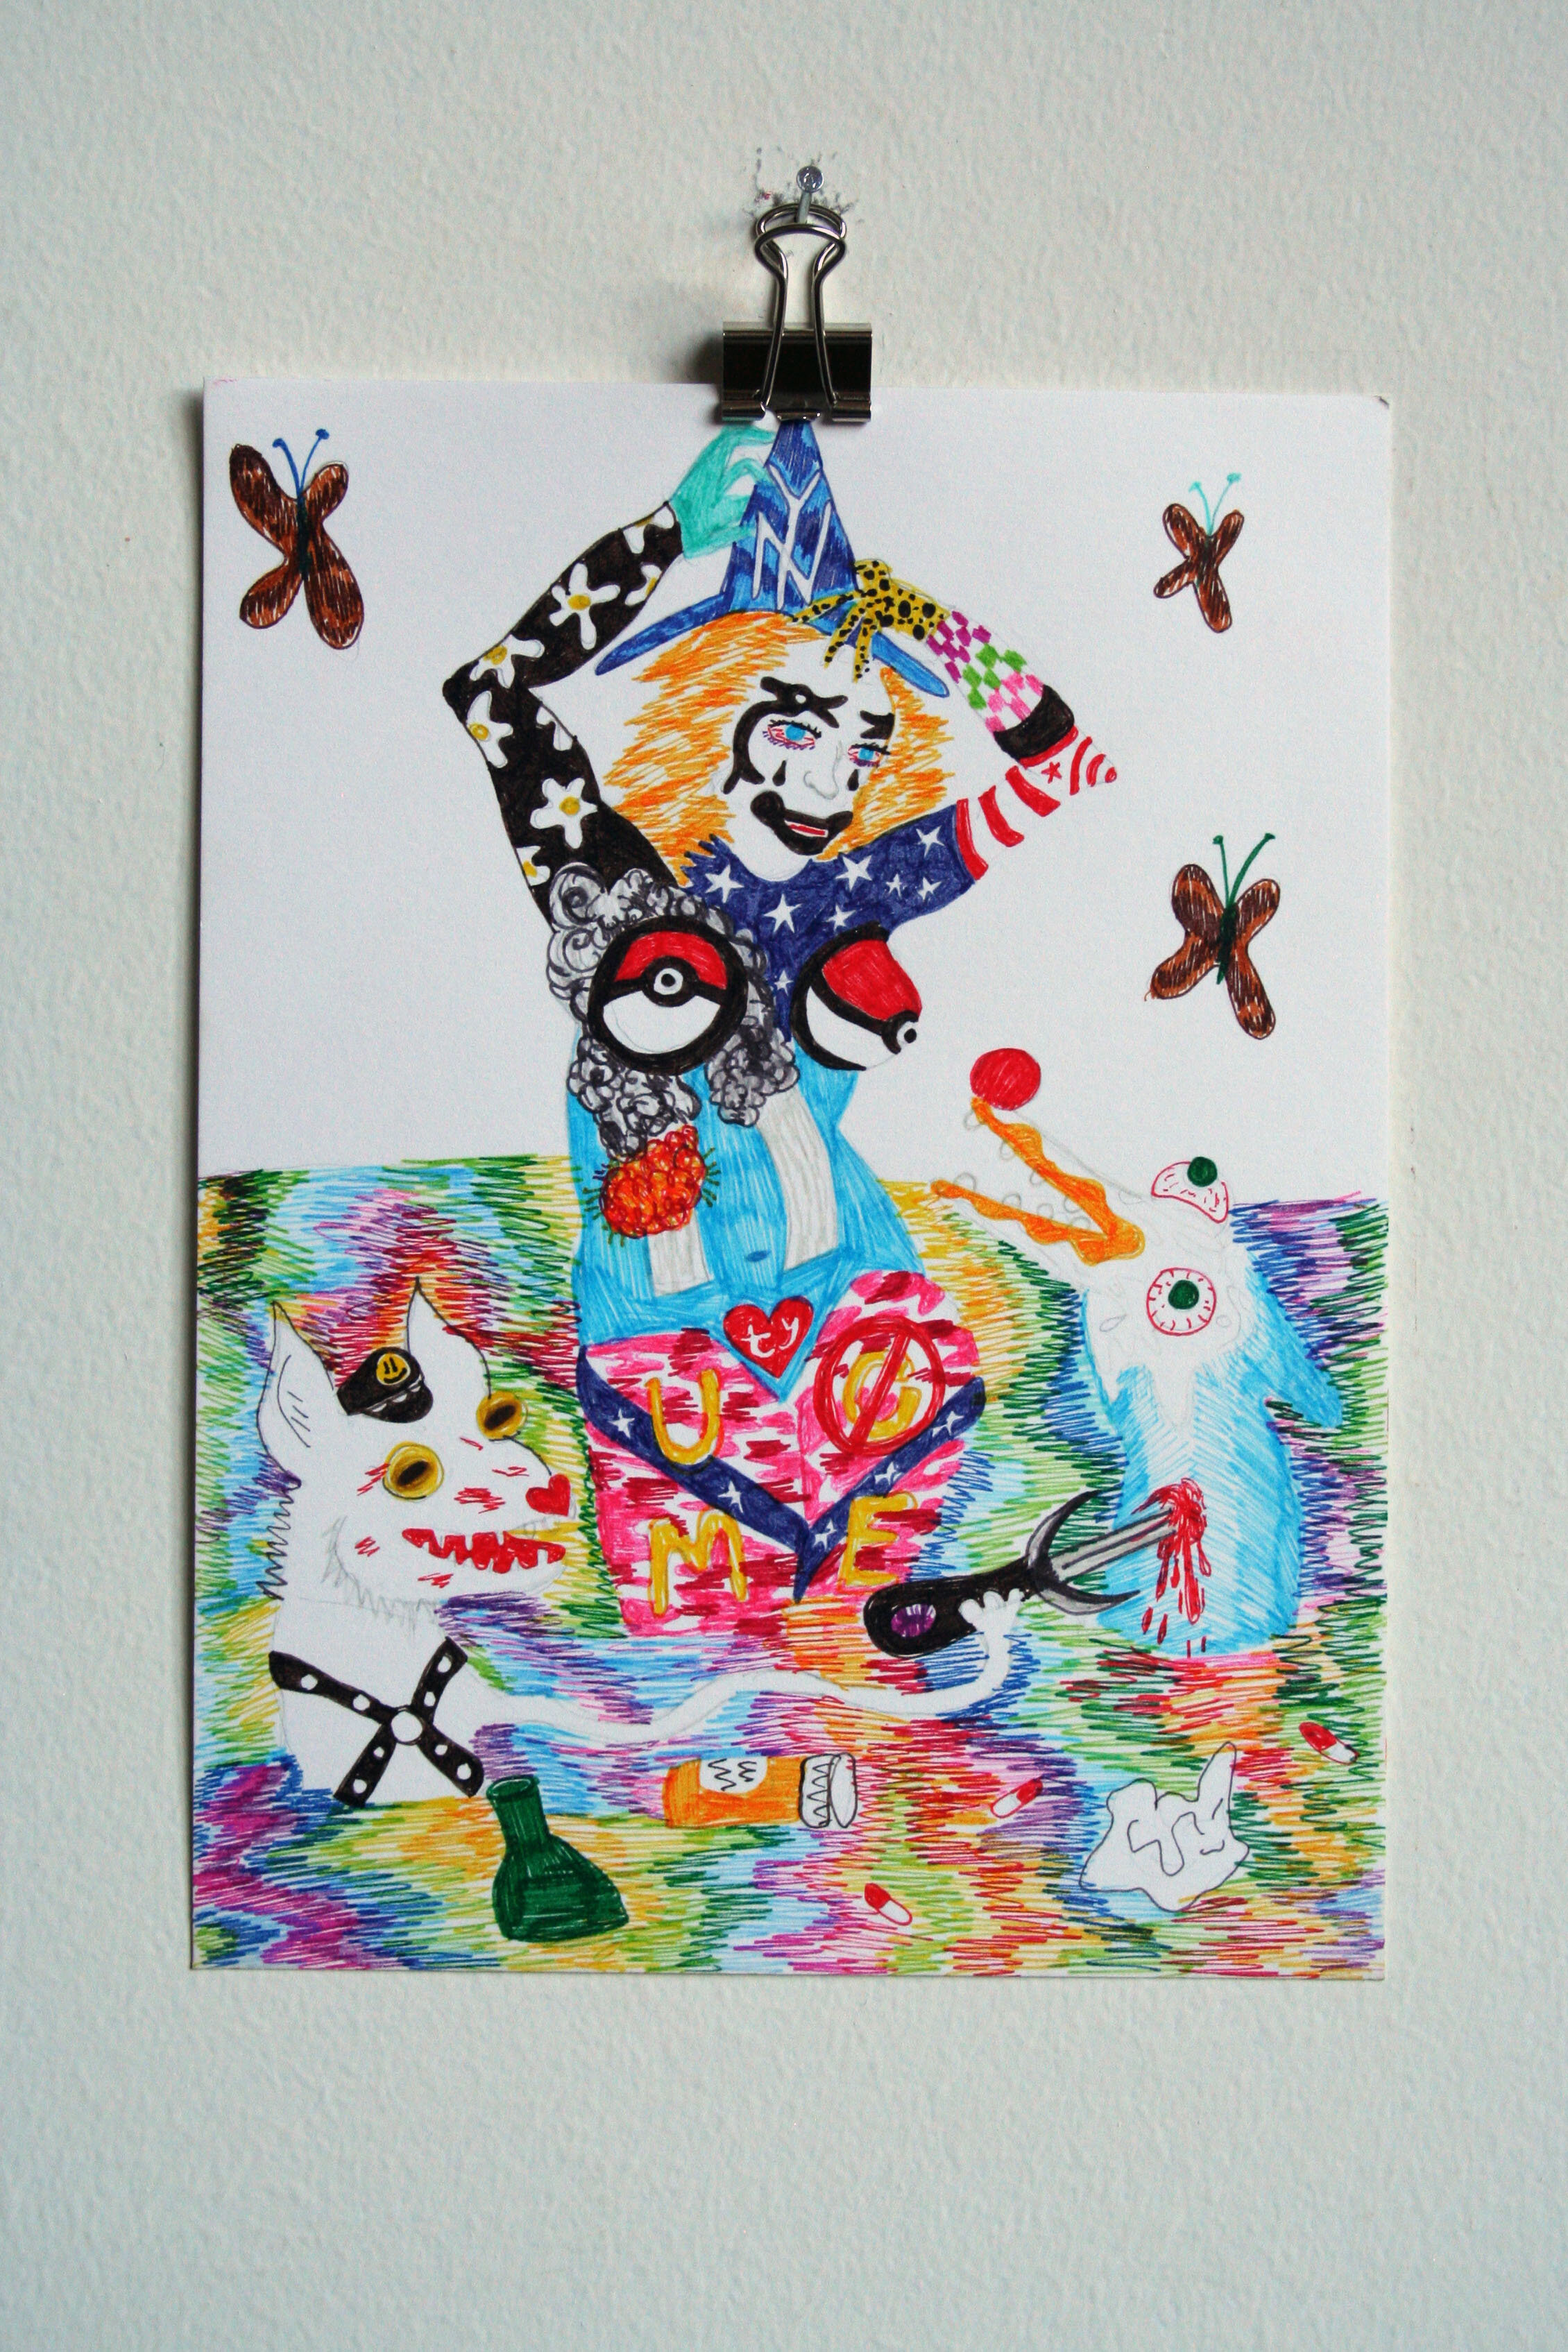   The Bathing Painted Woman , 2015  8 x 6 inches (20.32 x 15.24 cm.)  Marker on paper 